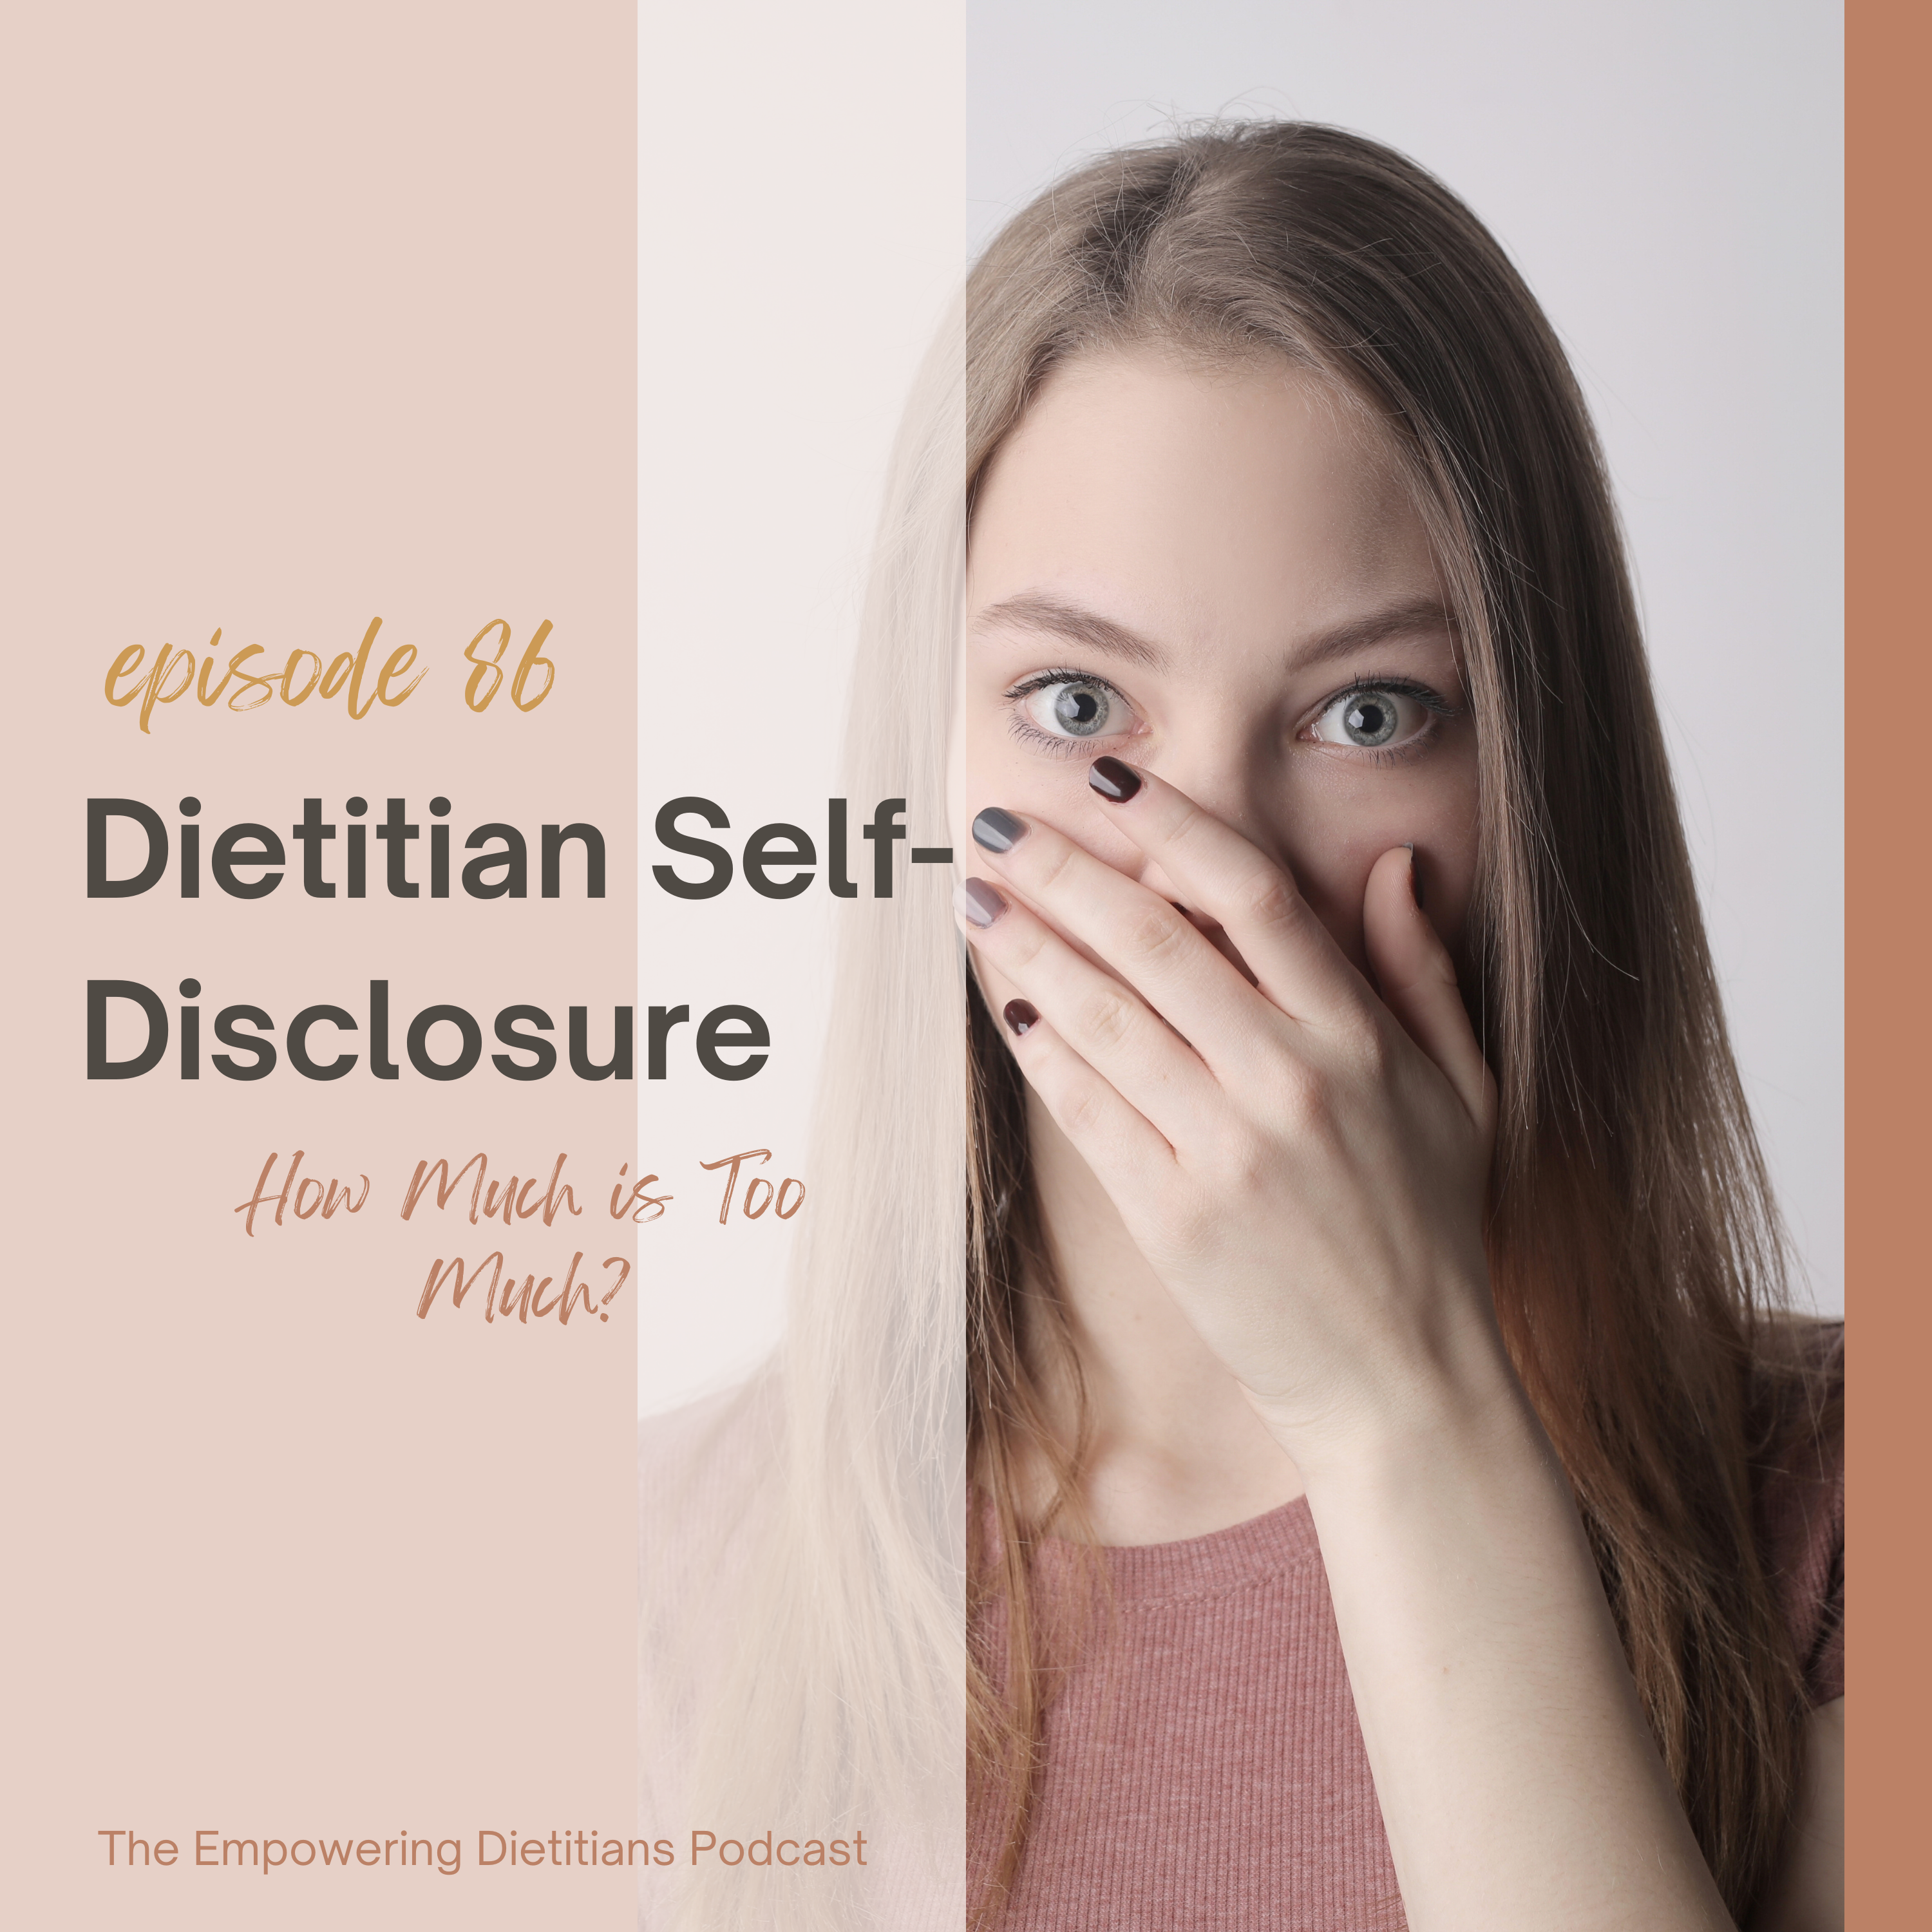 dietitian self-disclosure - how much is too much